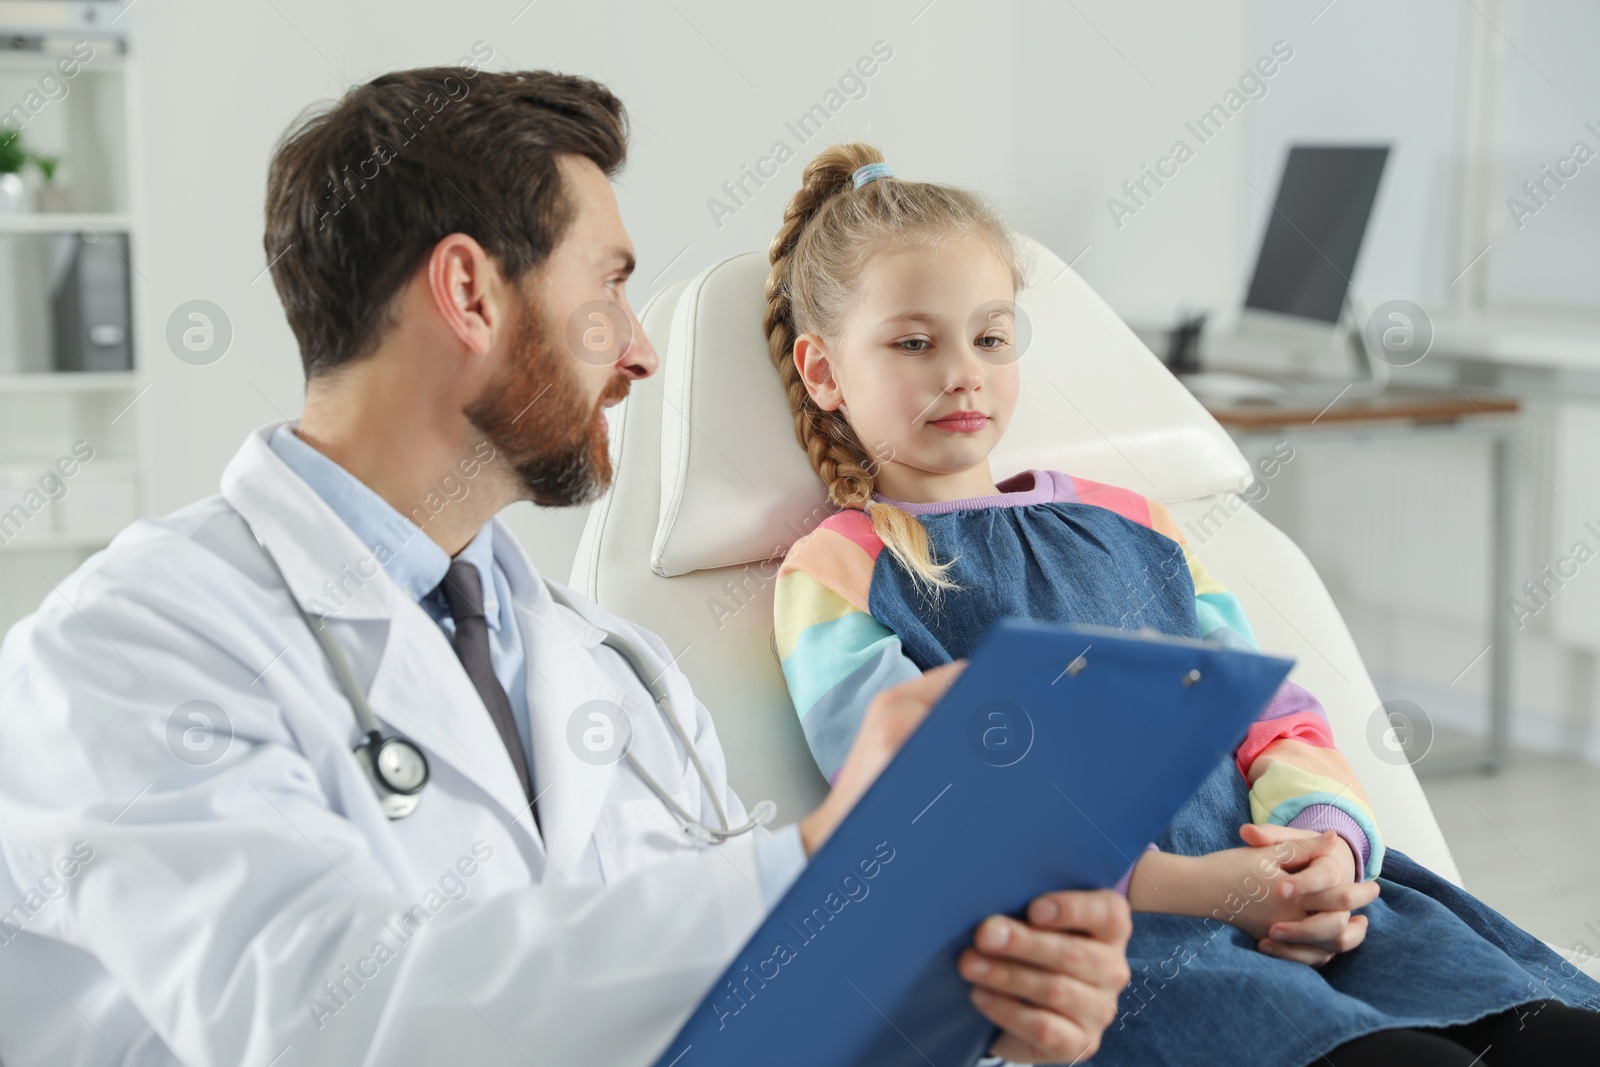 Photo of Pediatrician with clipboard consulting patient in clinic